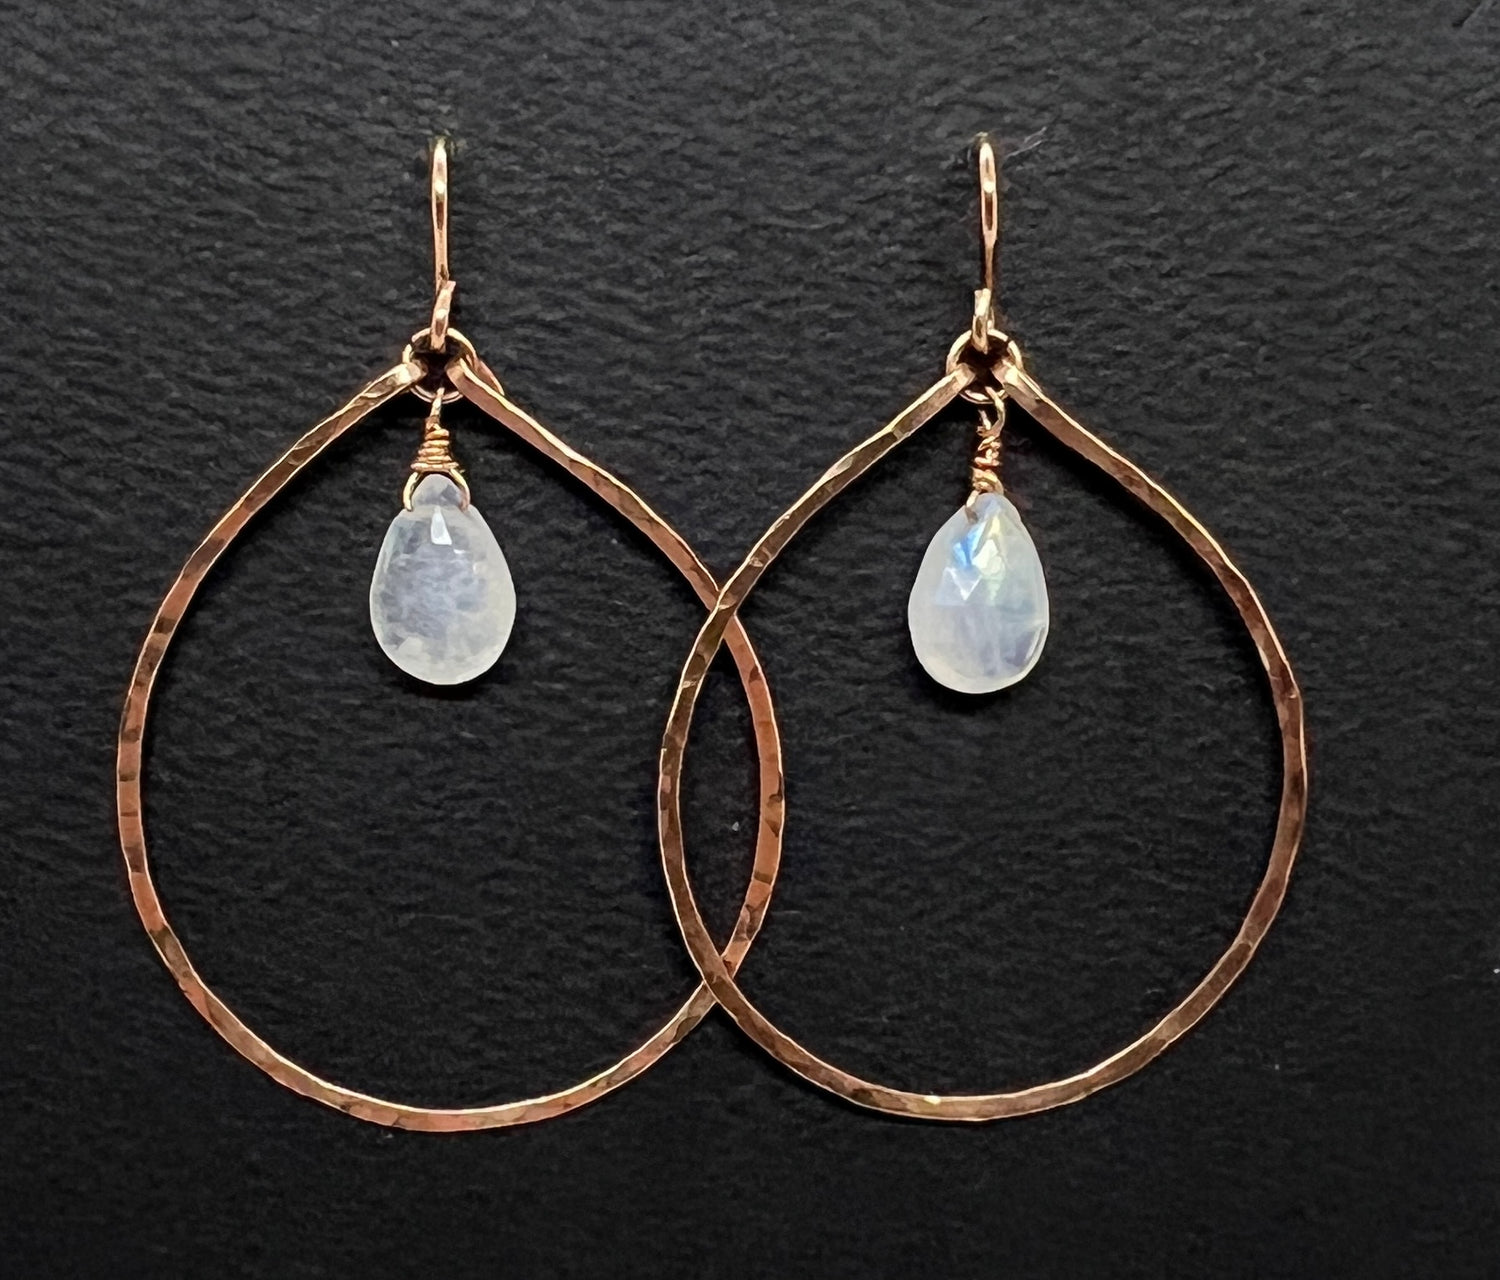 Moonstone and Hammered Rose Gold Hoop Earrings | Avery Blake Jewelry